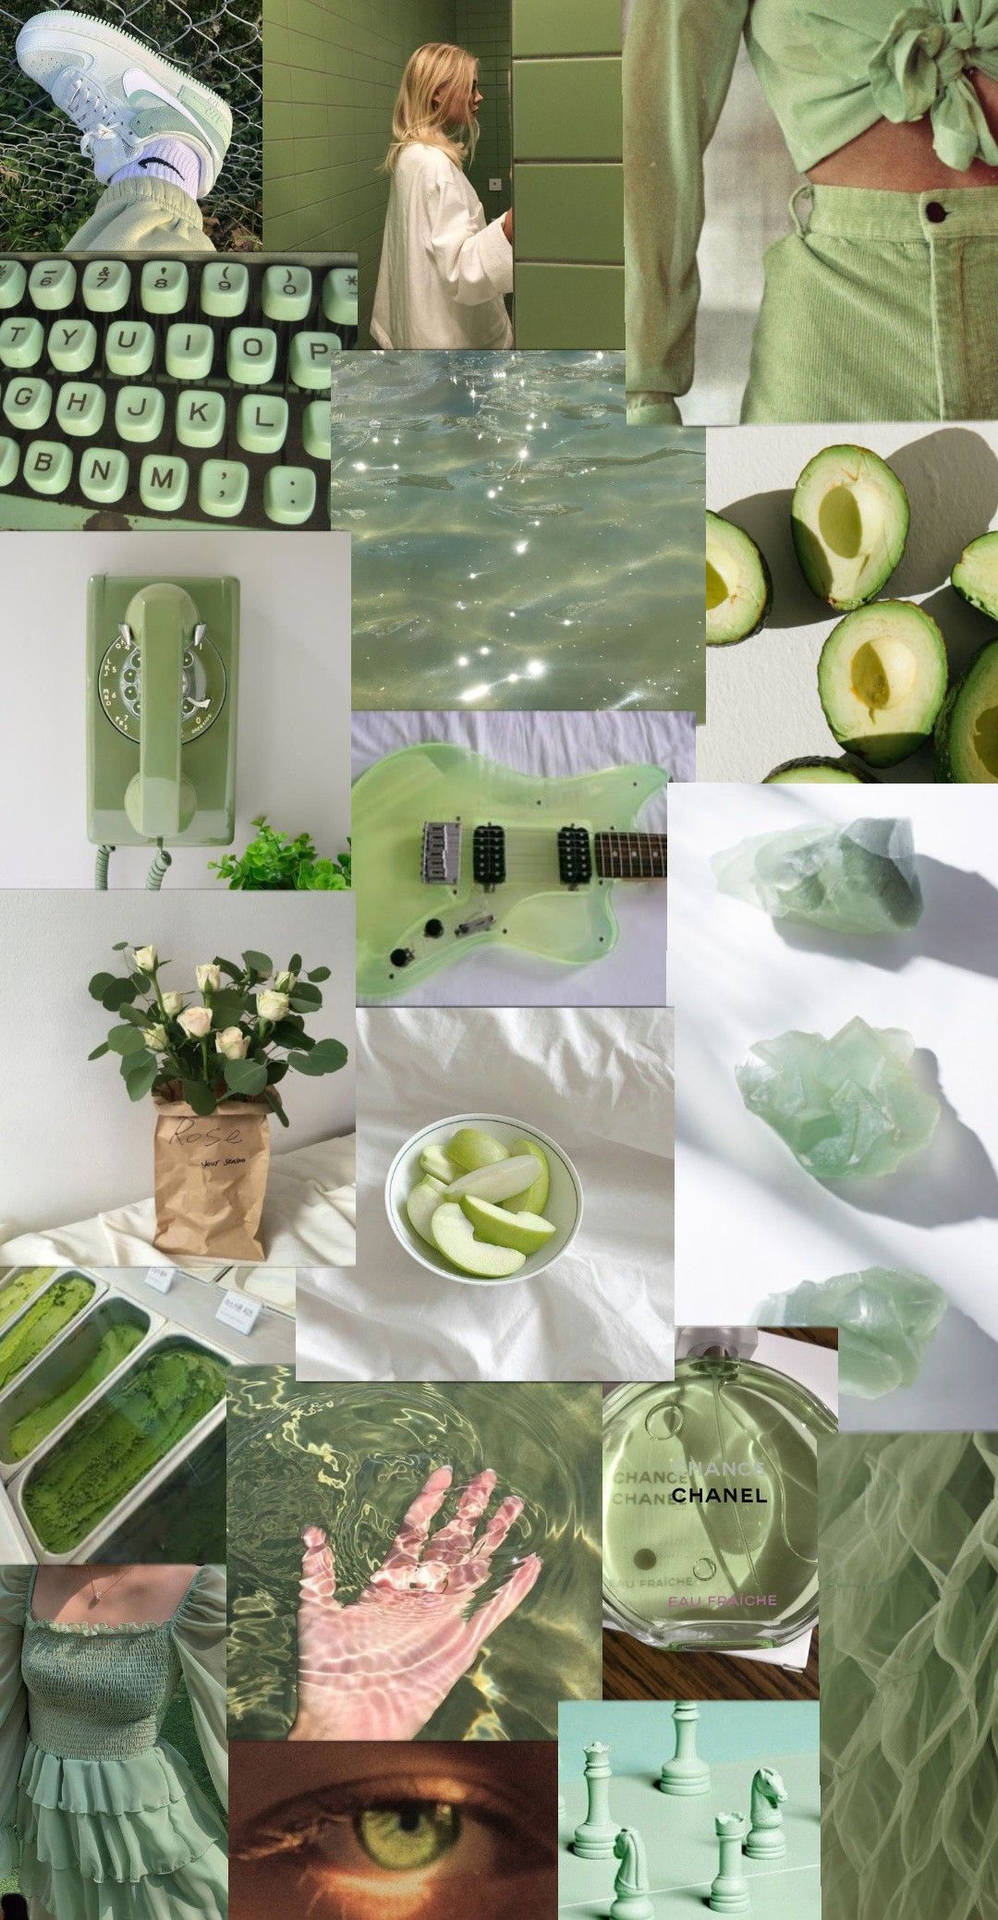 A collage of green aesthetic images including avocado, a keyboard, a guitar, and a Chanel bag. - Pastel green